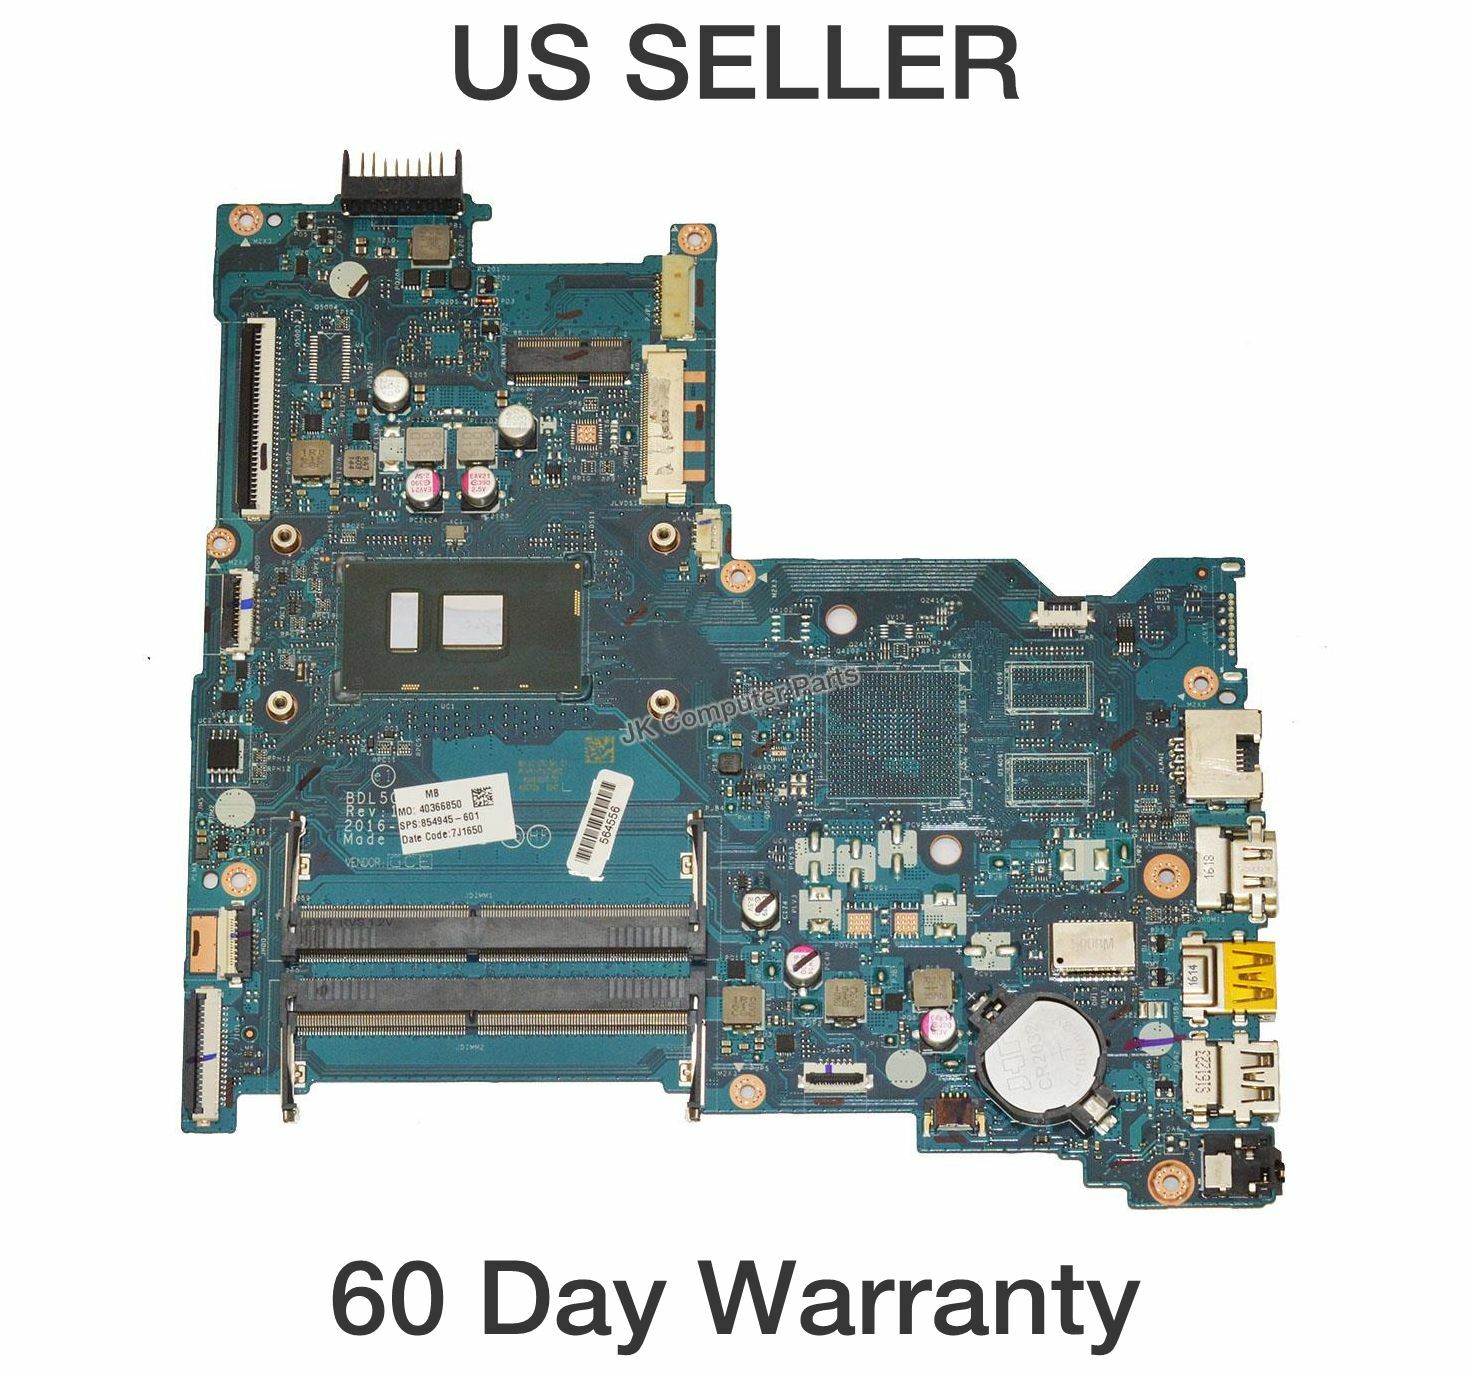 HP 15-AY Laptop Motherboard TS w/ i5-6200U 2.3Ghz CPU 854945-601 This motherboard is pulled from a new, test